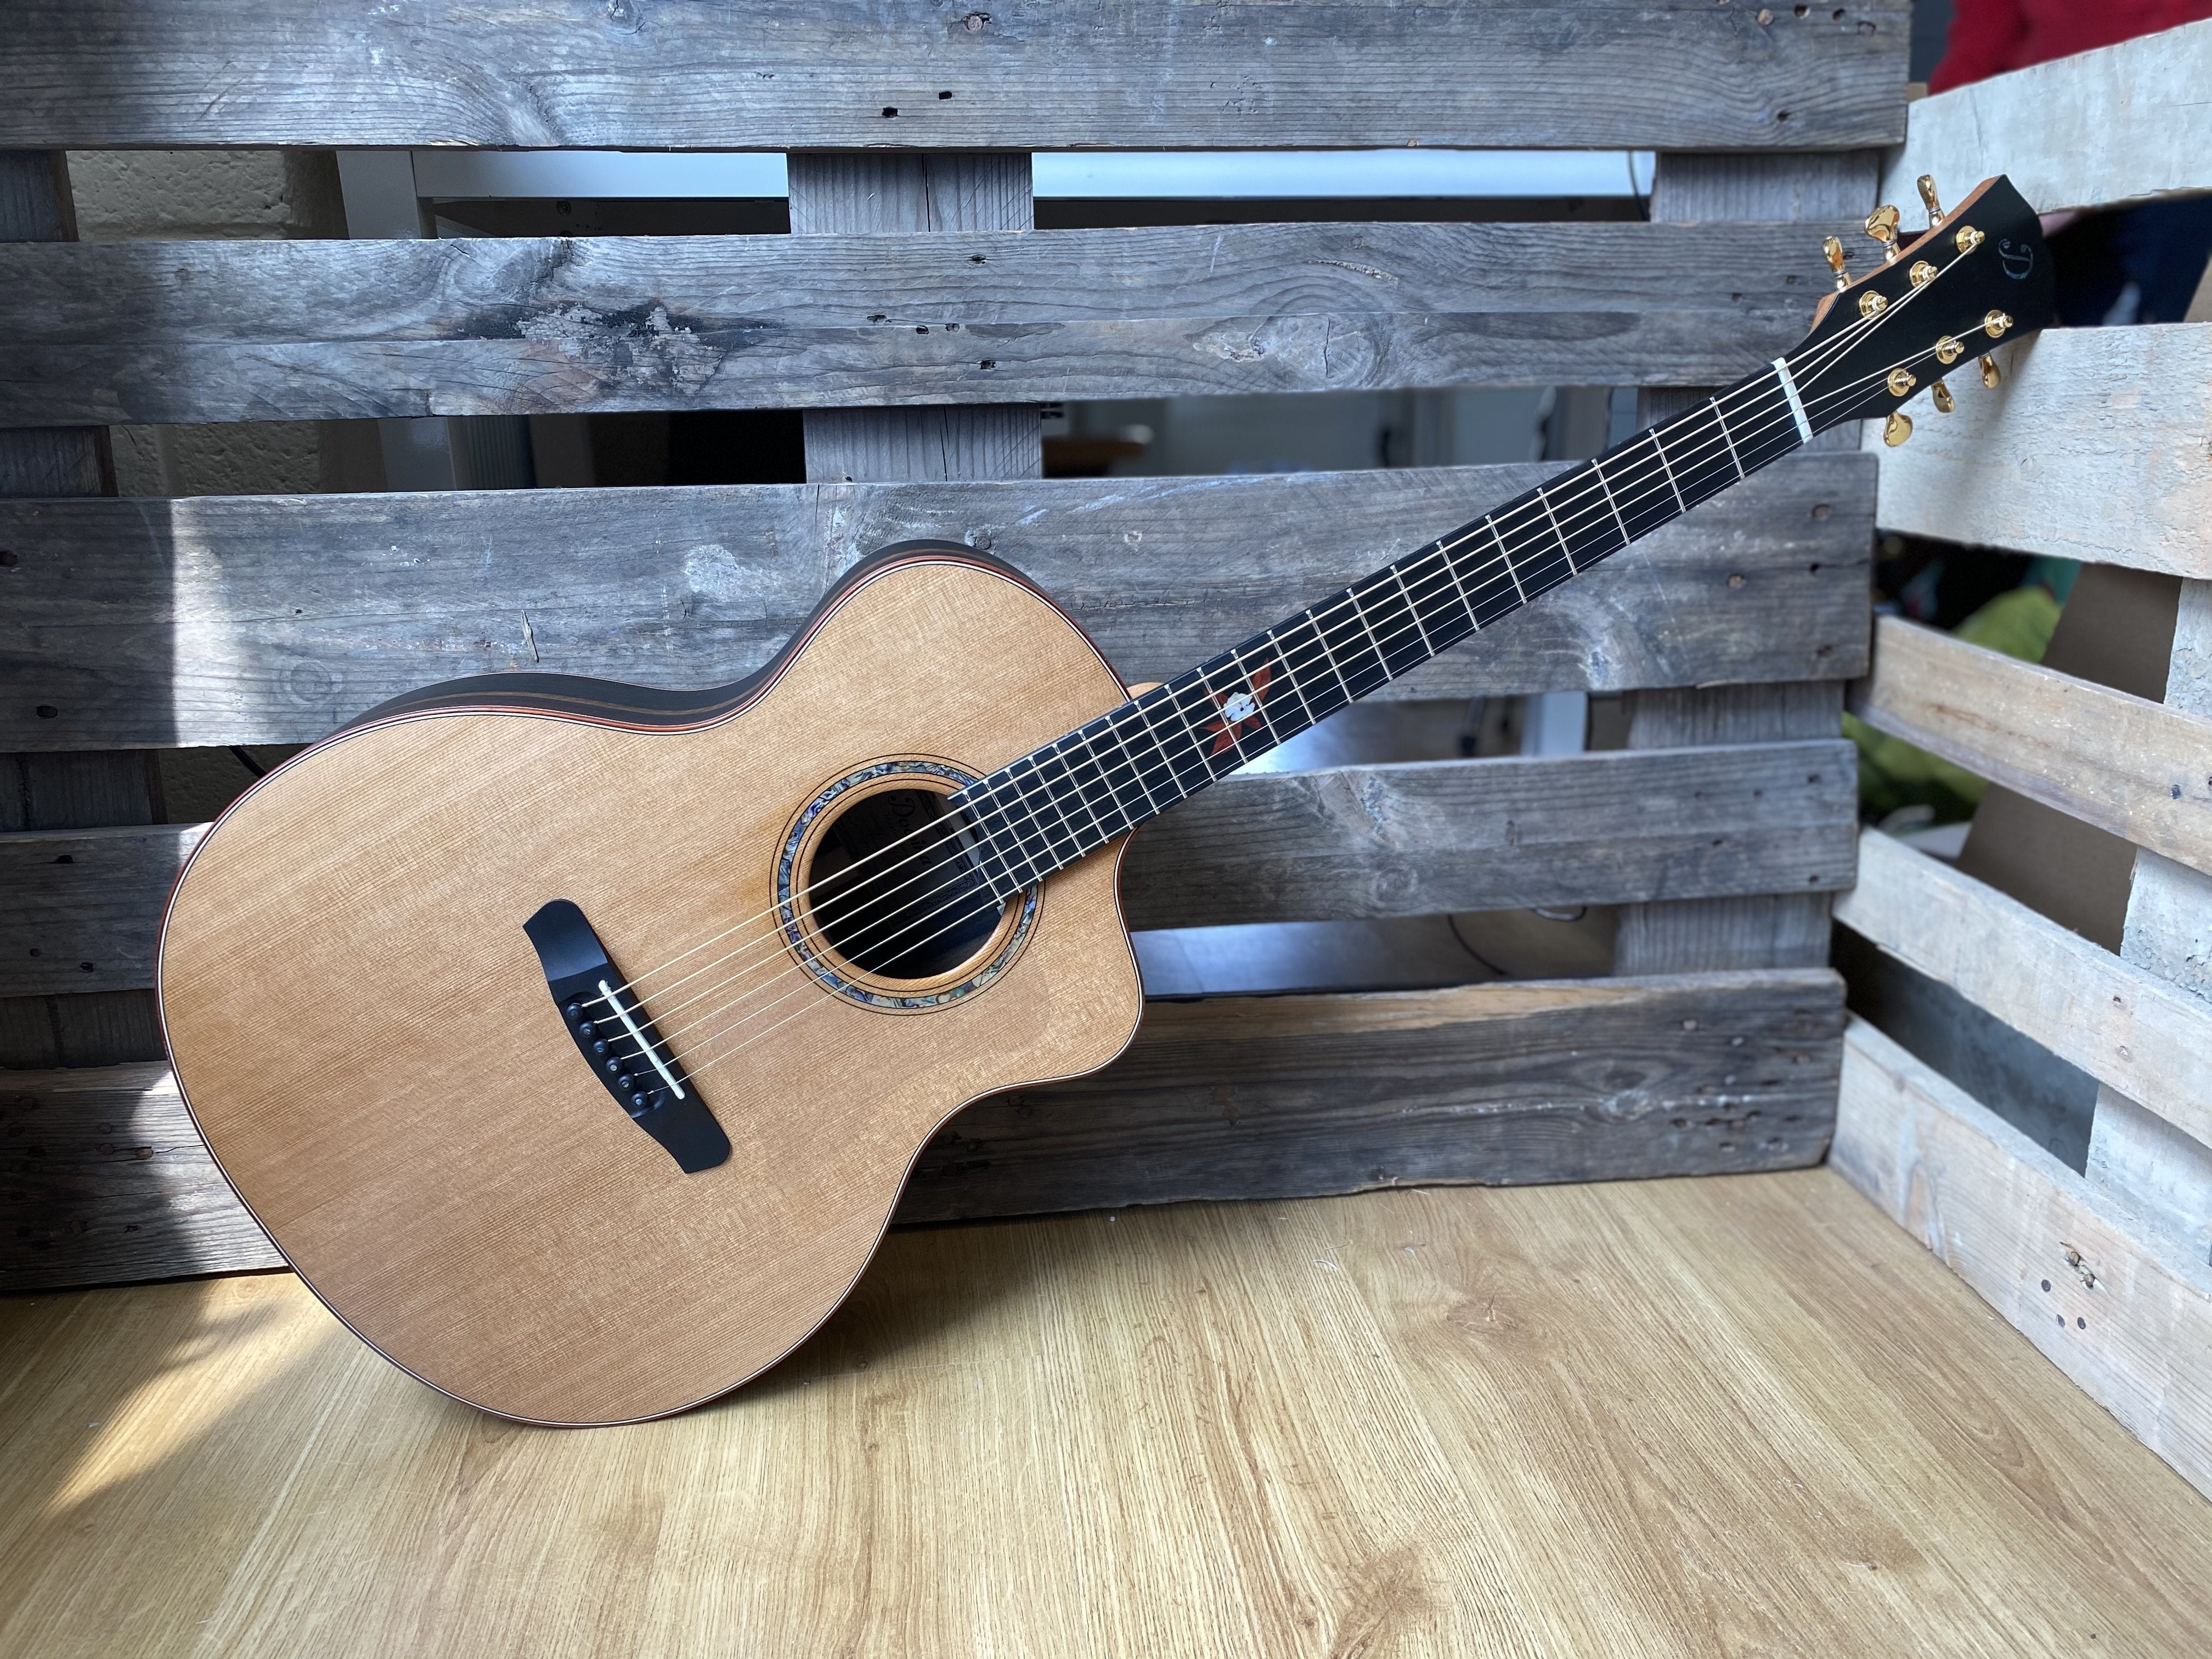 Dowina Figured Ebony OMG Deluxe Masters With Torrifed Swiss Moon Spruce Top, Acoustic Guitar for sale at Richards Guitars.